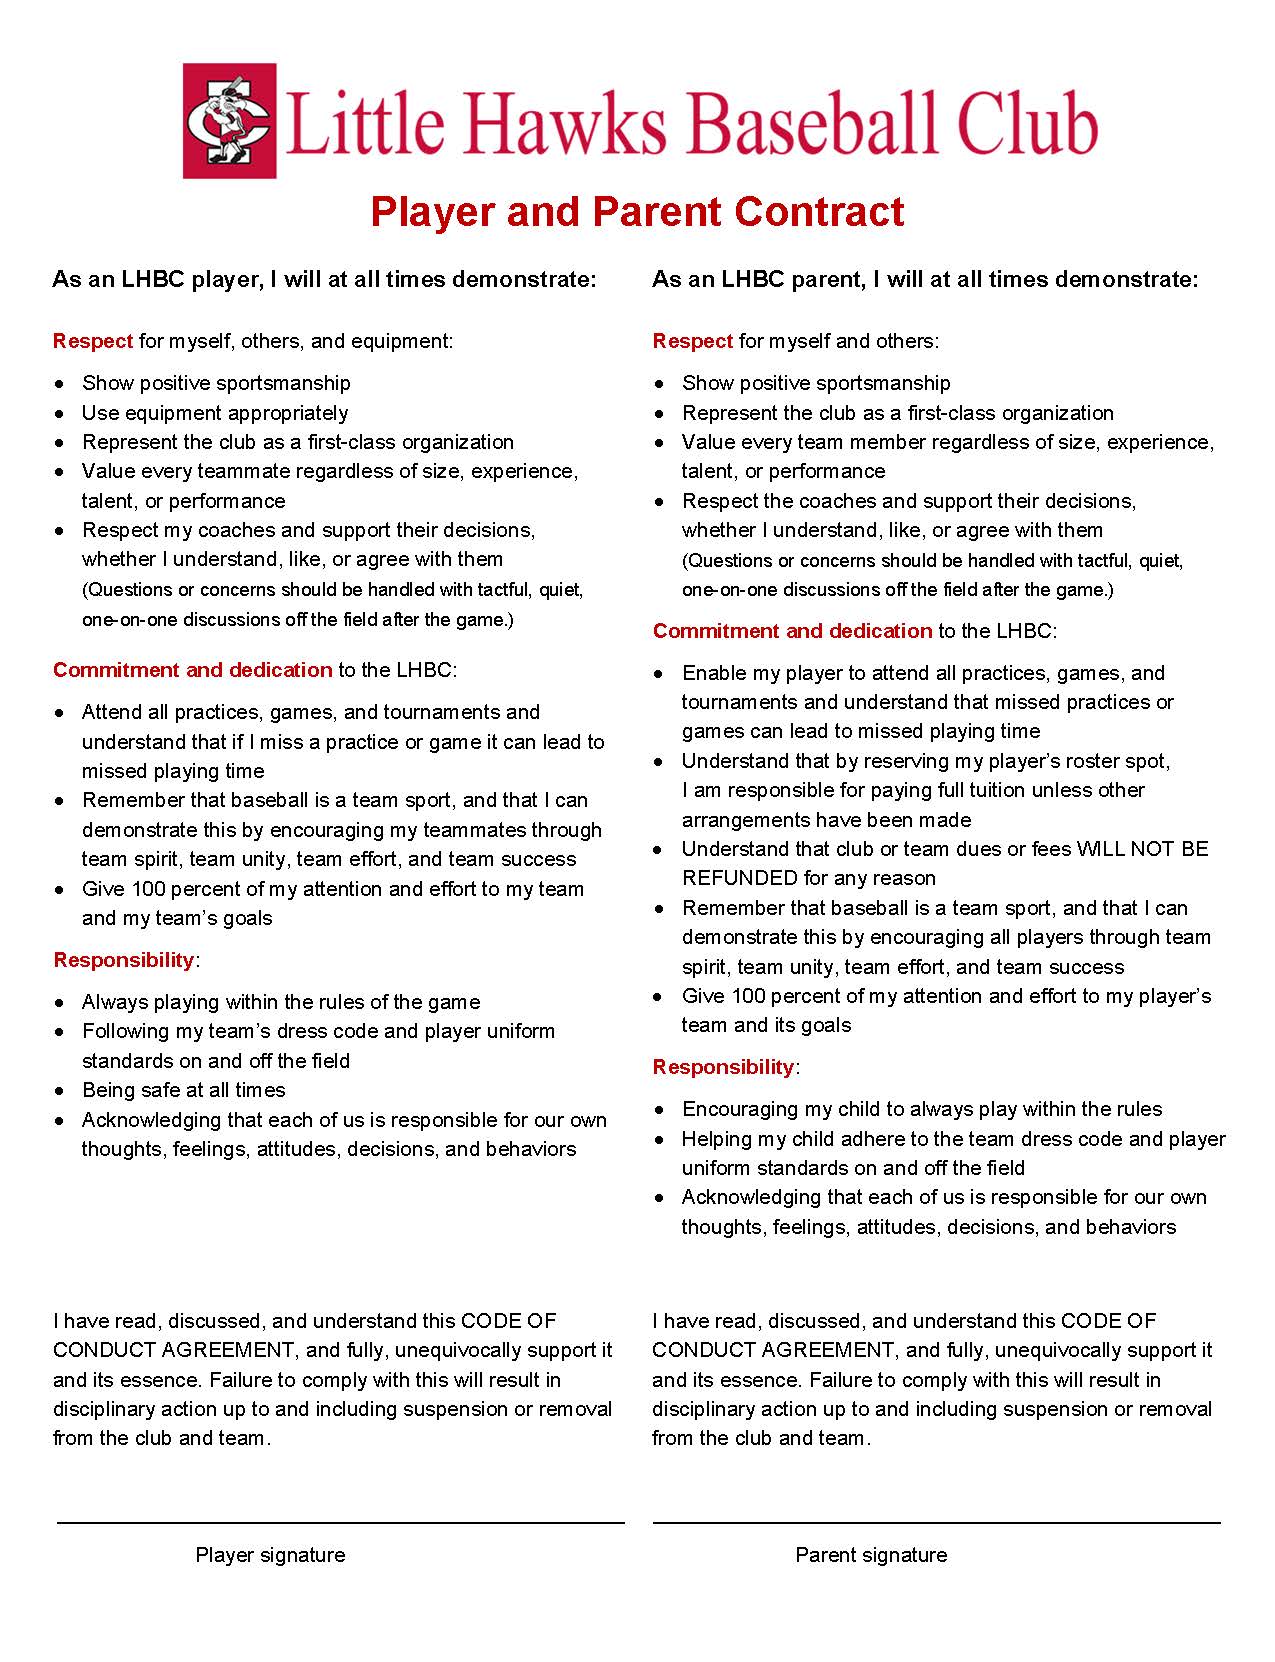 LHBC Player and Parent Contract : Little Hawks Baseball Club